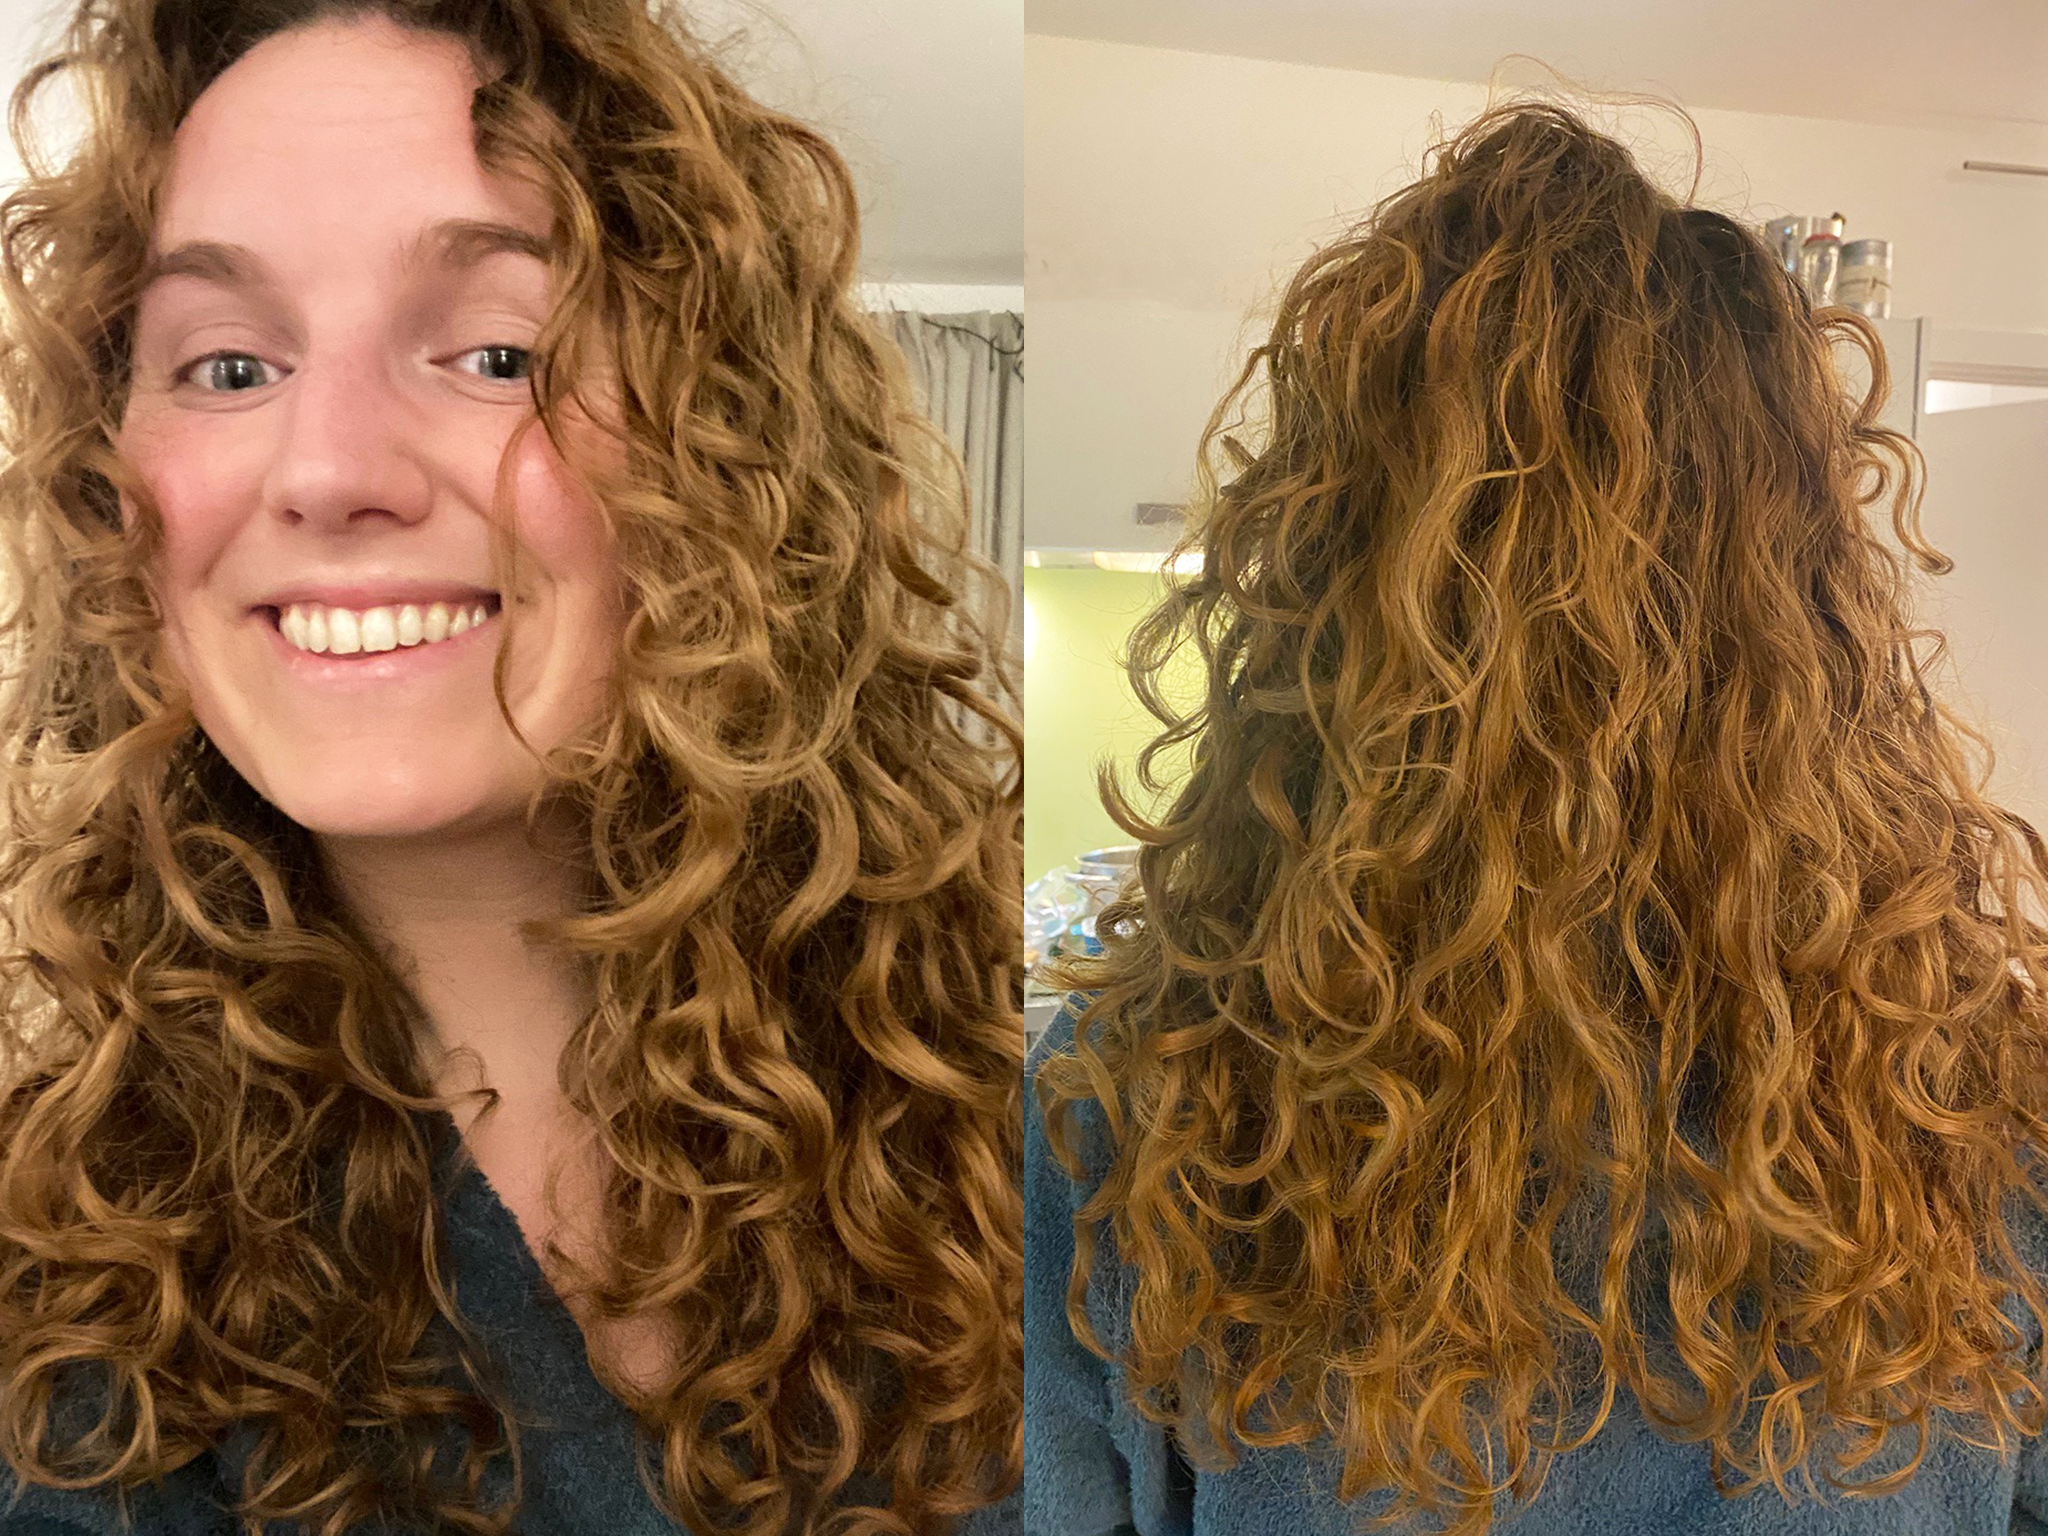 Results got better with each wash day, and our curls were bouncier when using the mousse